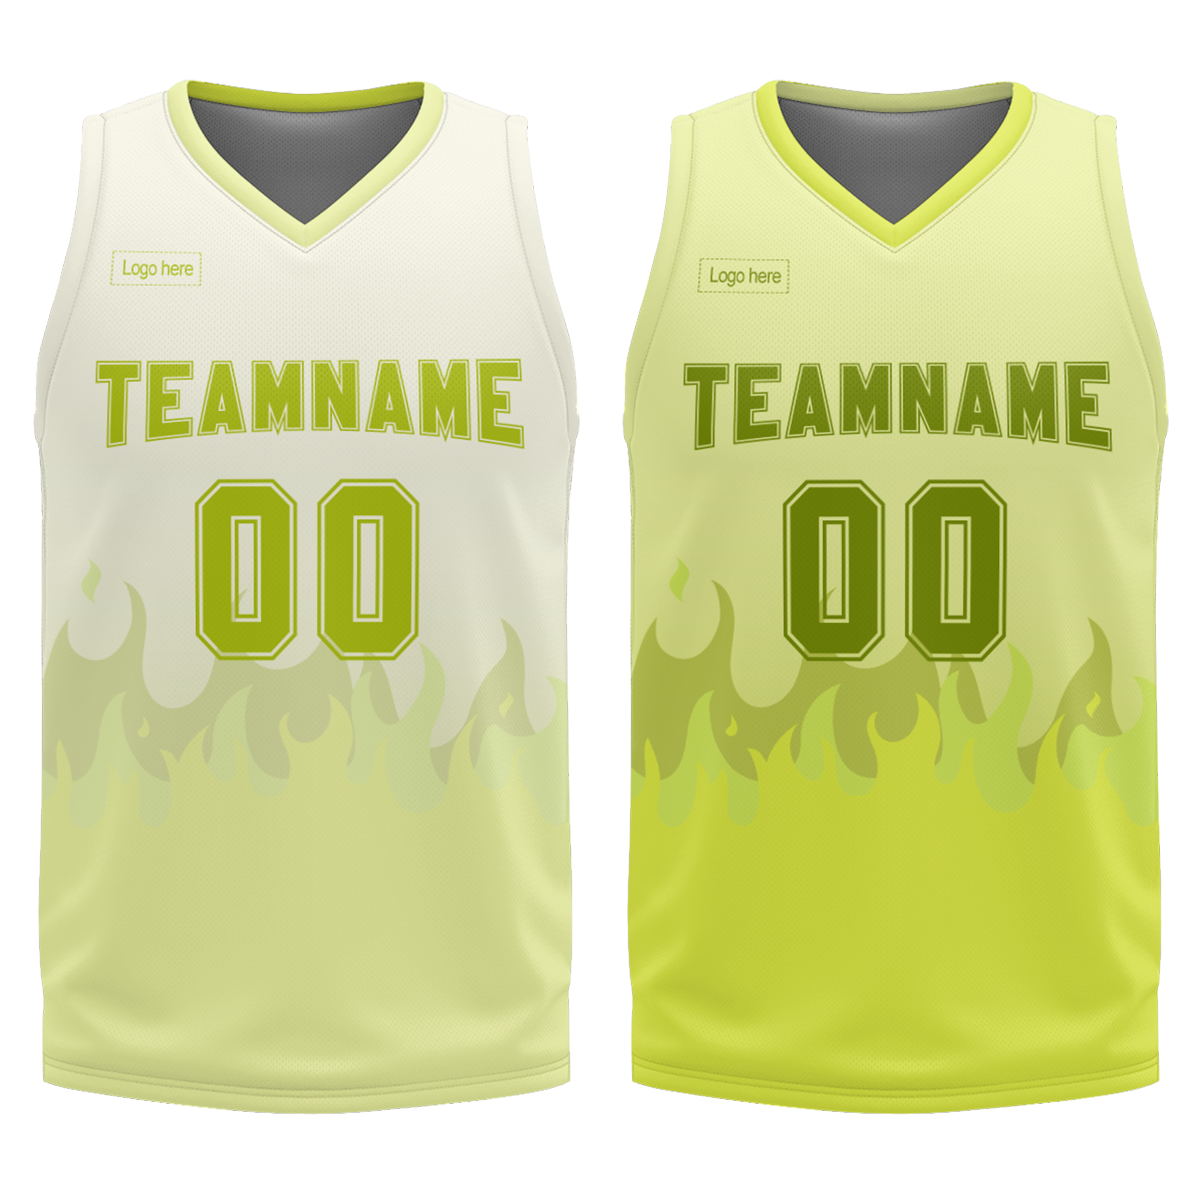 customized-with-personalized-logo-and-printing-basketball-team-name-reversible-basketball-jerseys-at-cj-pod-4